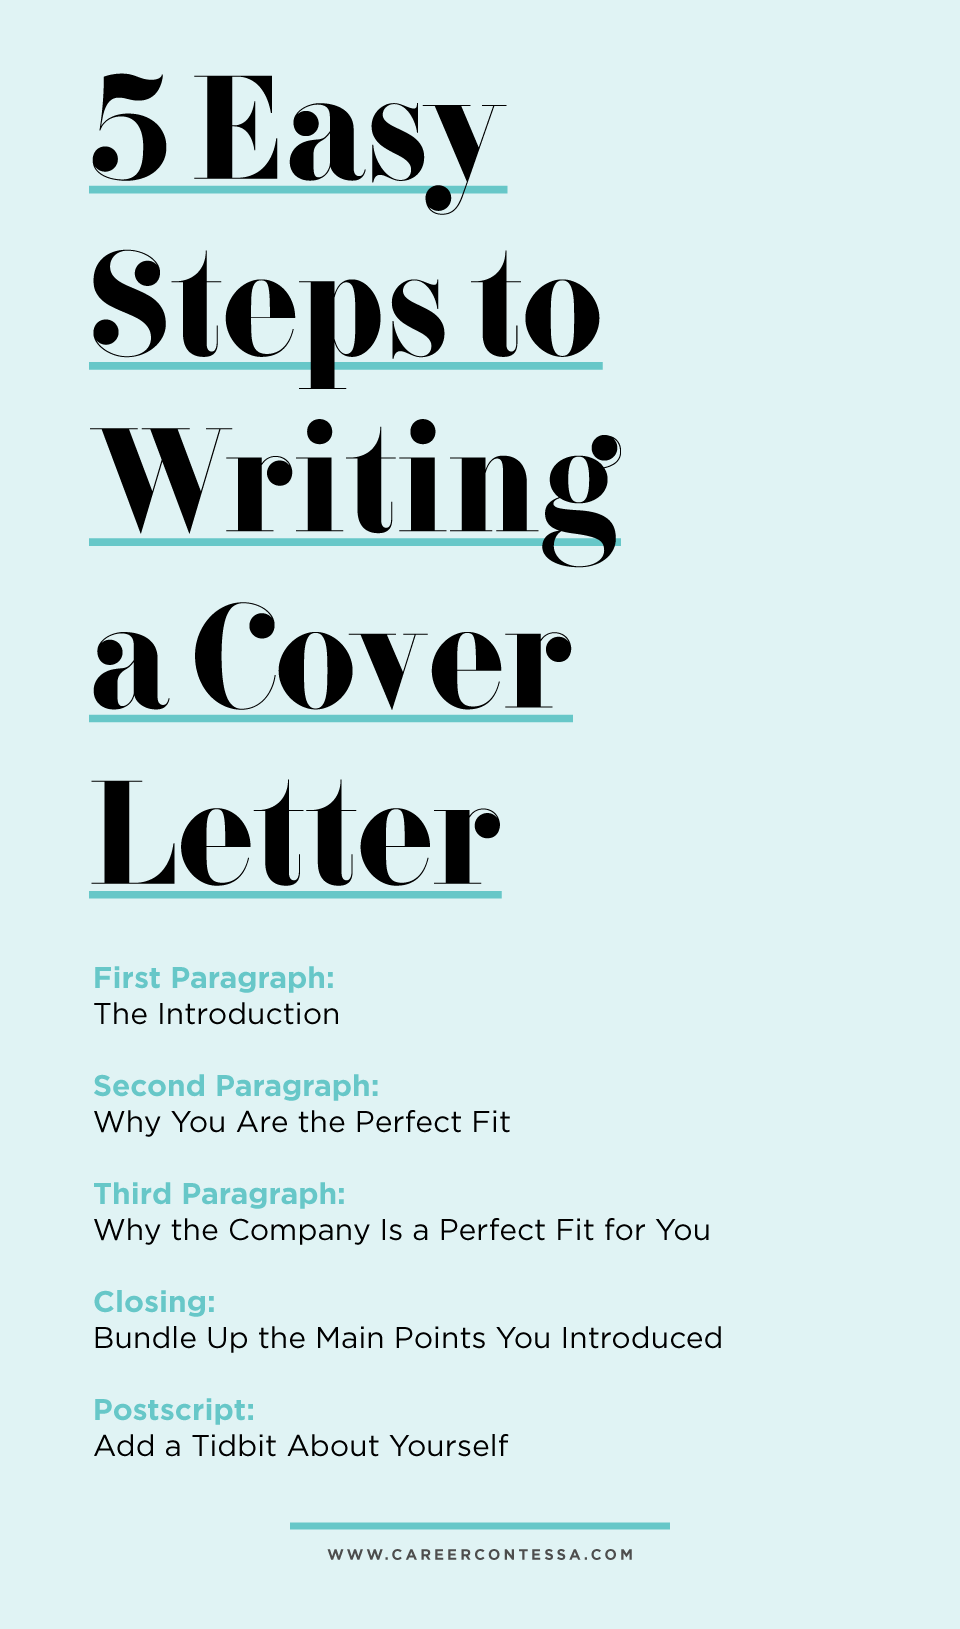 cover letter writing 101